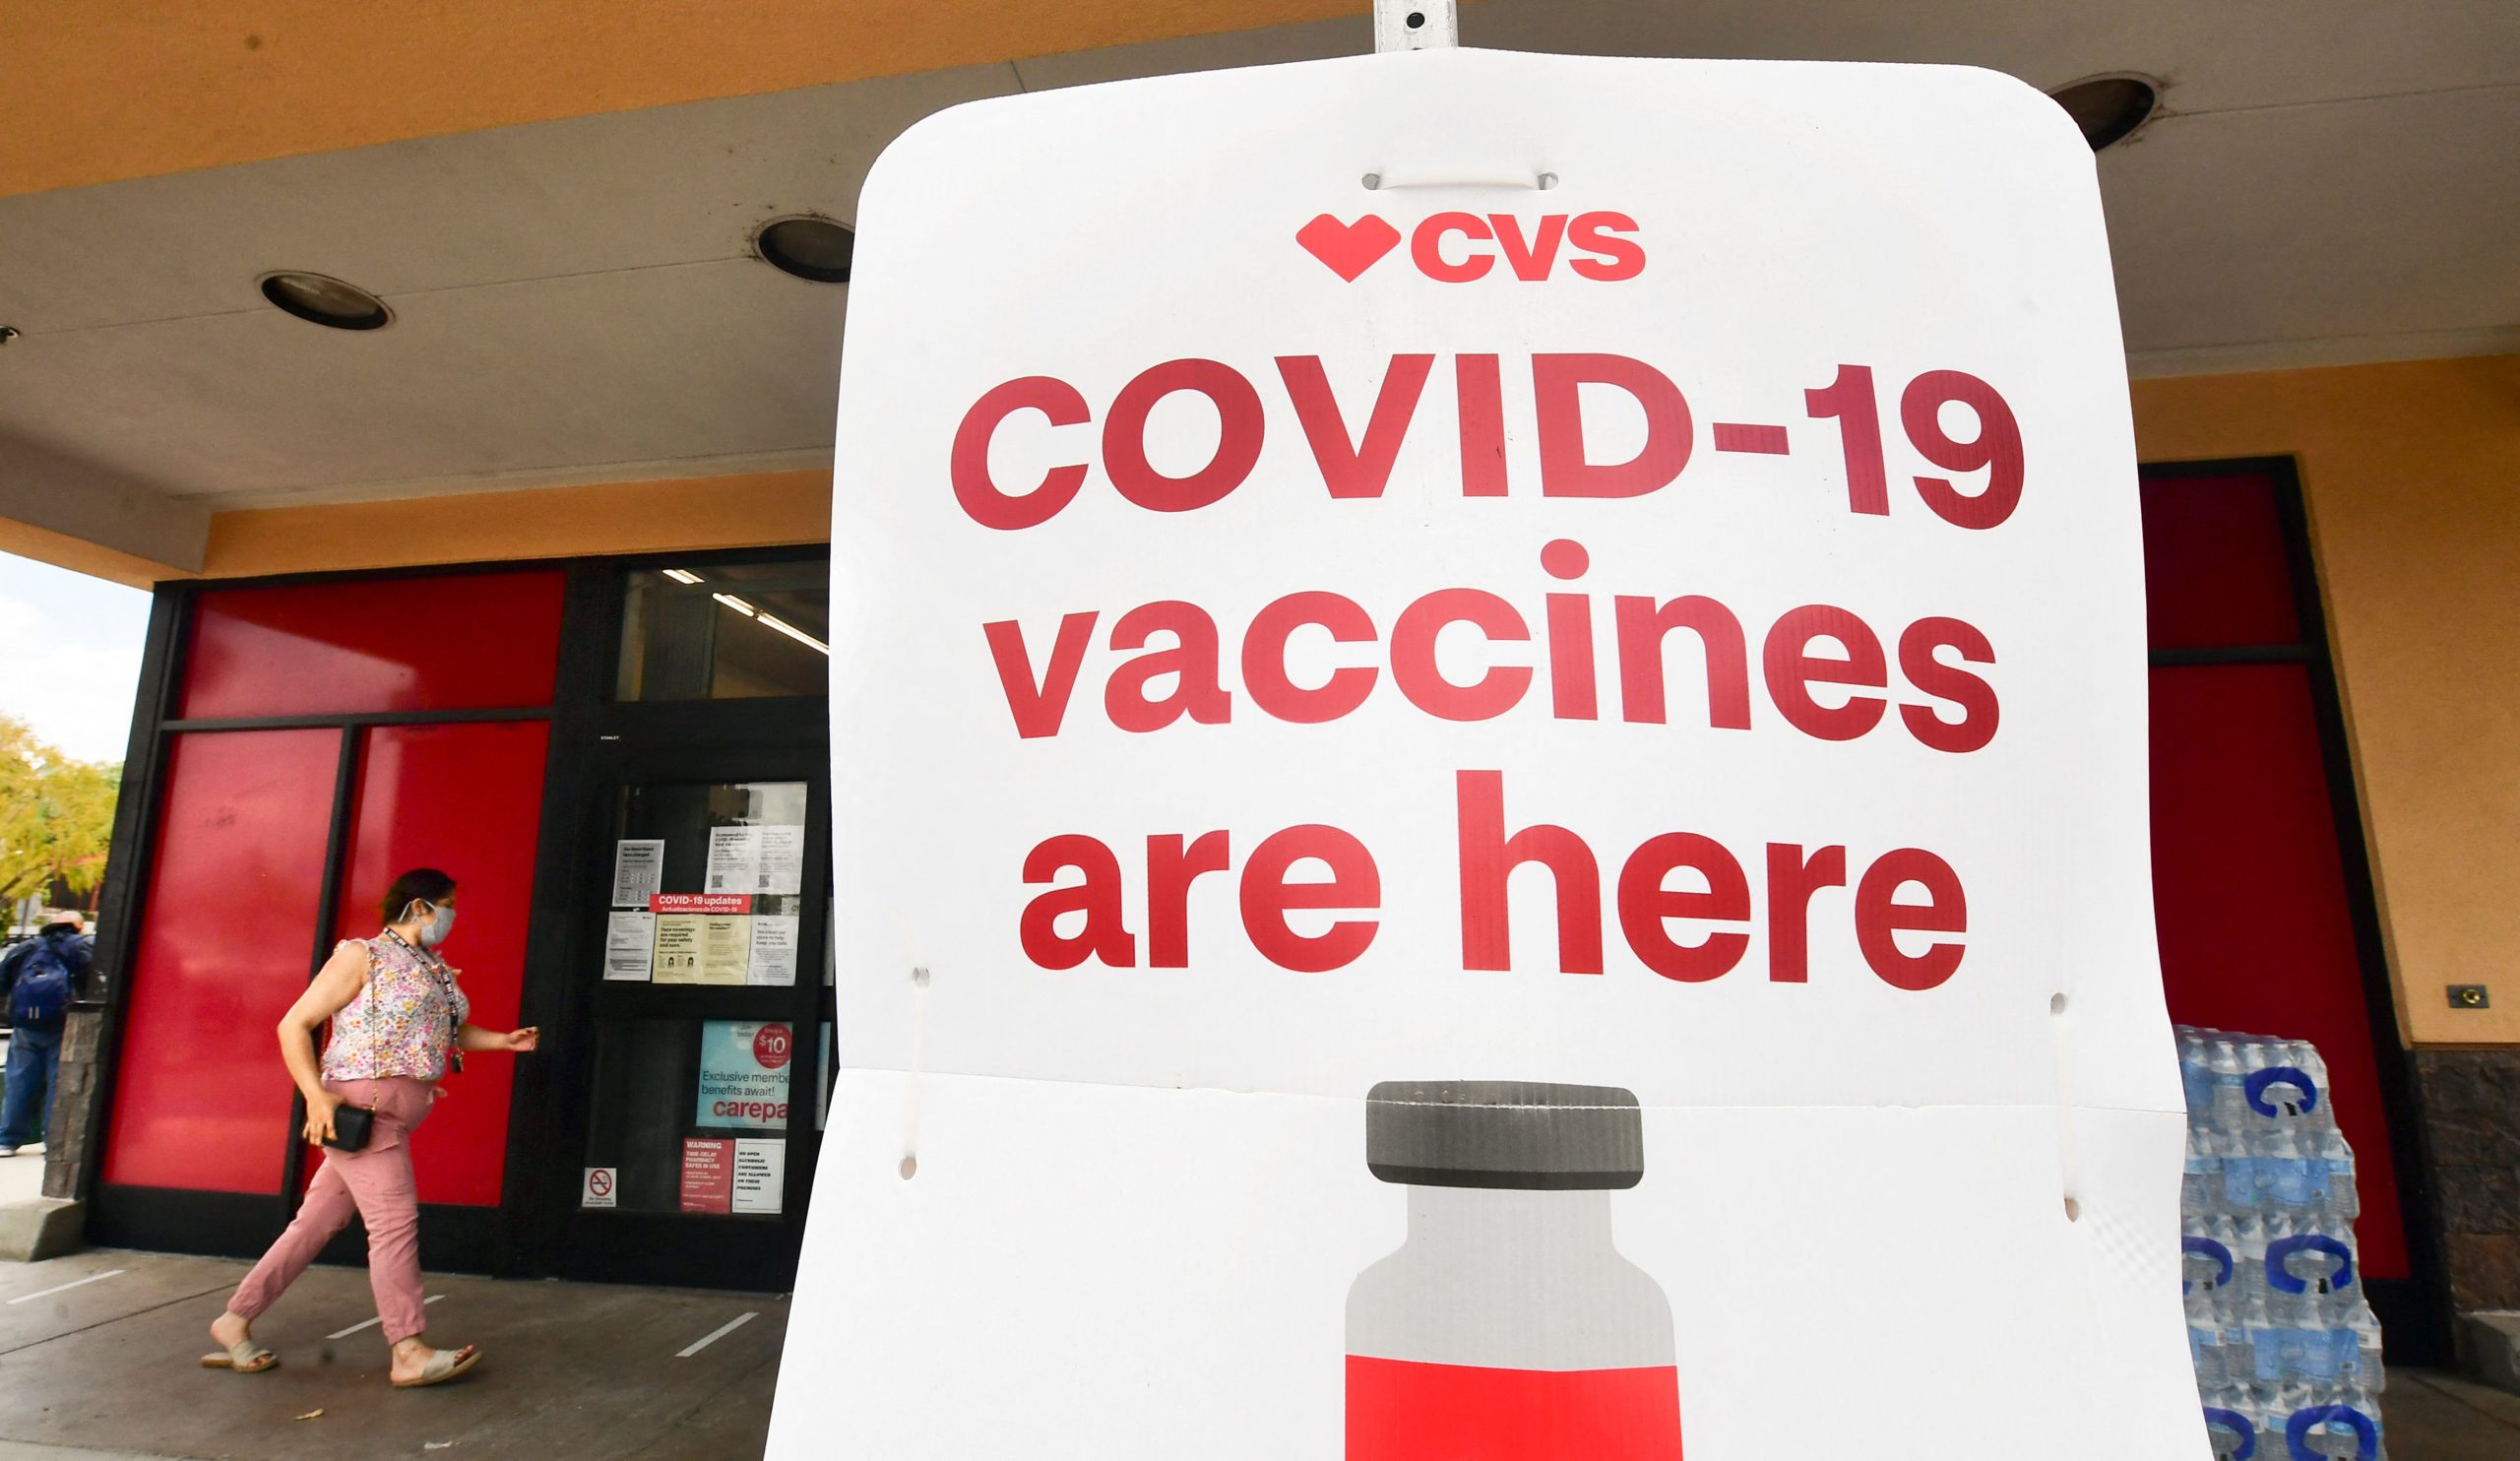 A woman enters a CVS COVID-19 vaccine site in Monterey Park, California on April 27. (Frederic J. Brown/AFP via Getty Images)